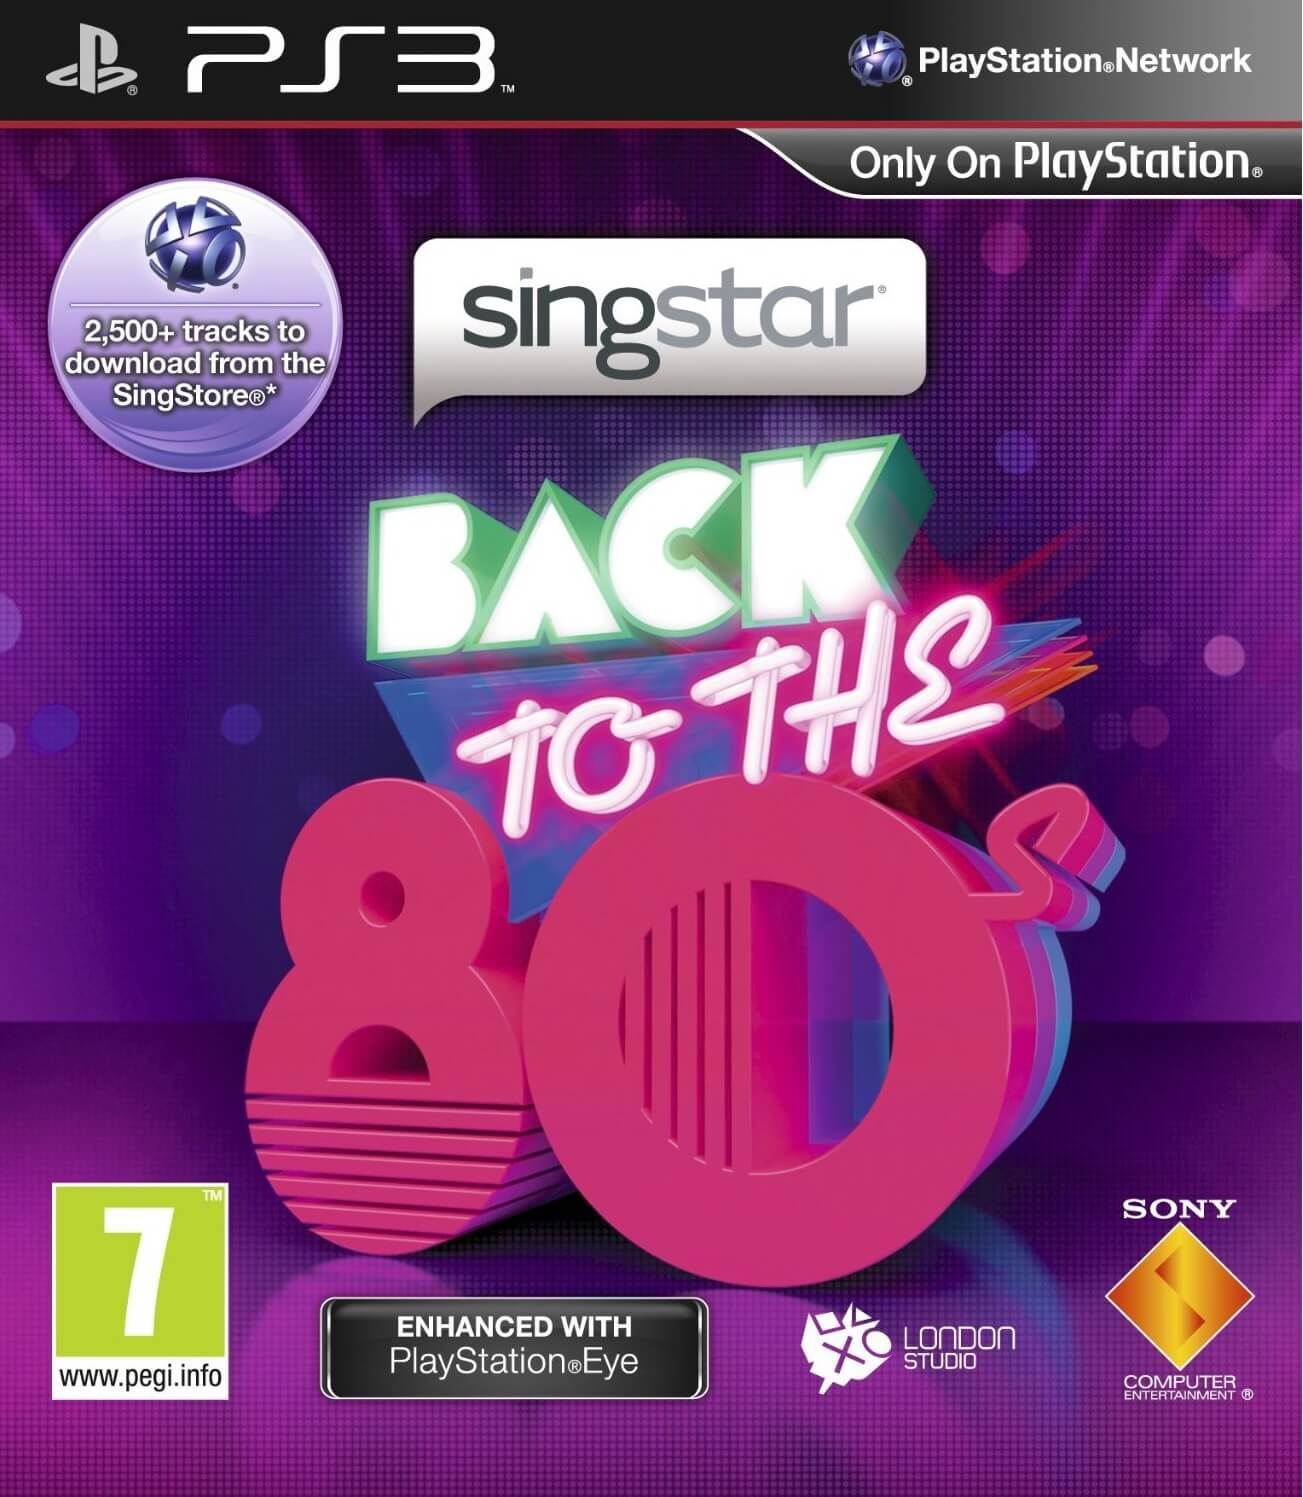 SingStar: Back to the 80s